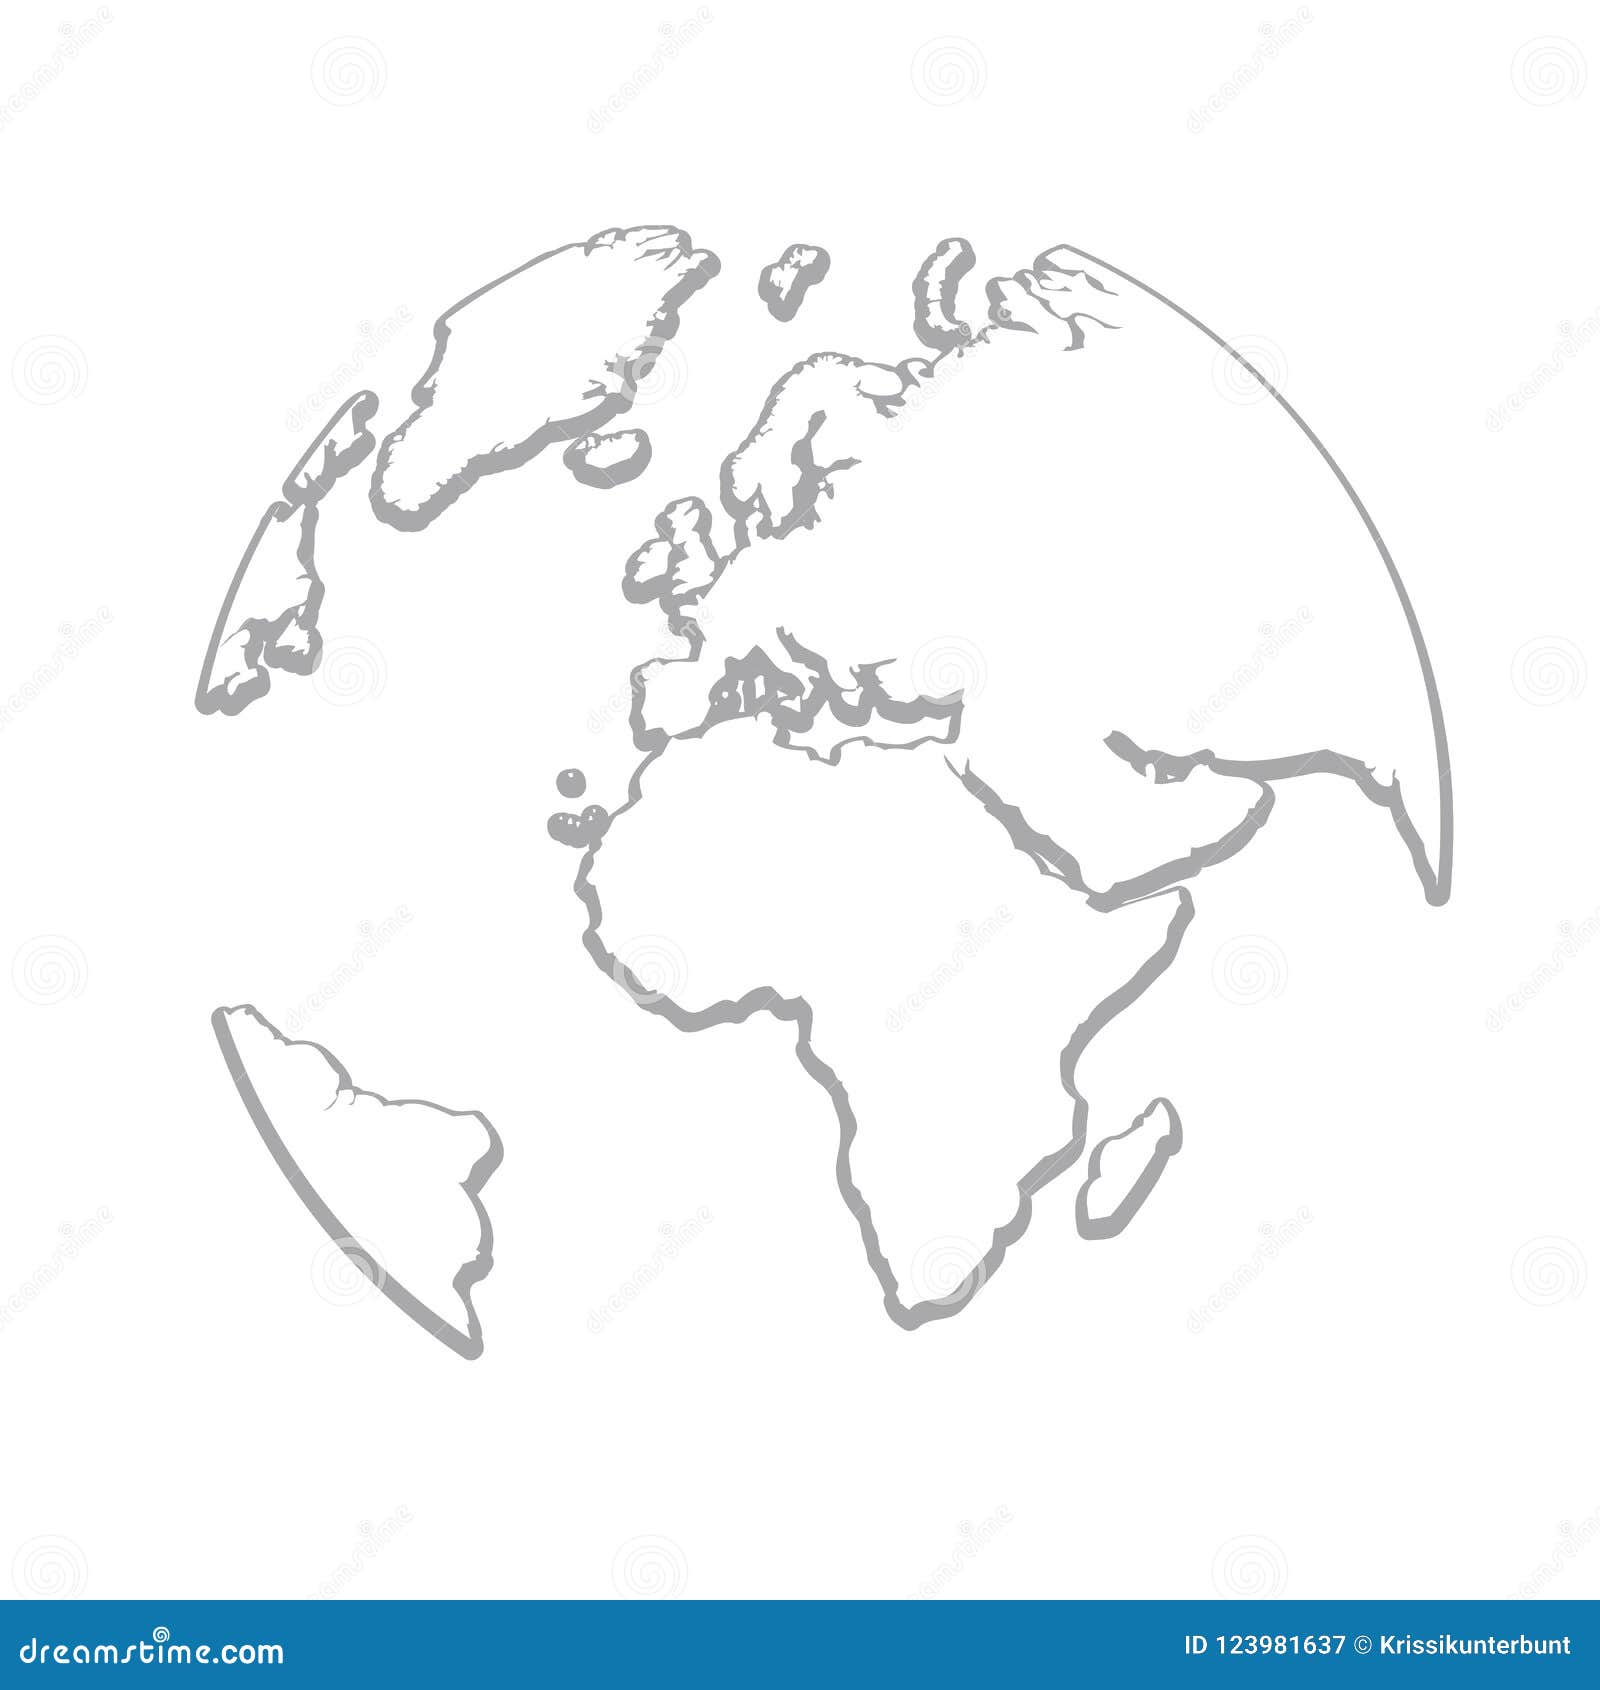 Earth Globes Simple Grey Drawing Stock Vector Illustration Of Flat Pictogram